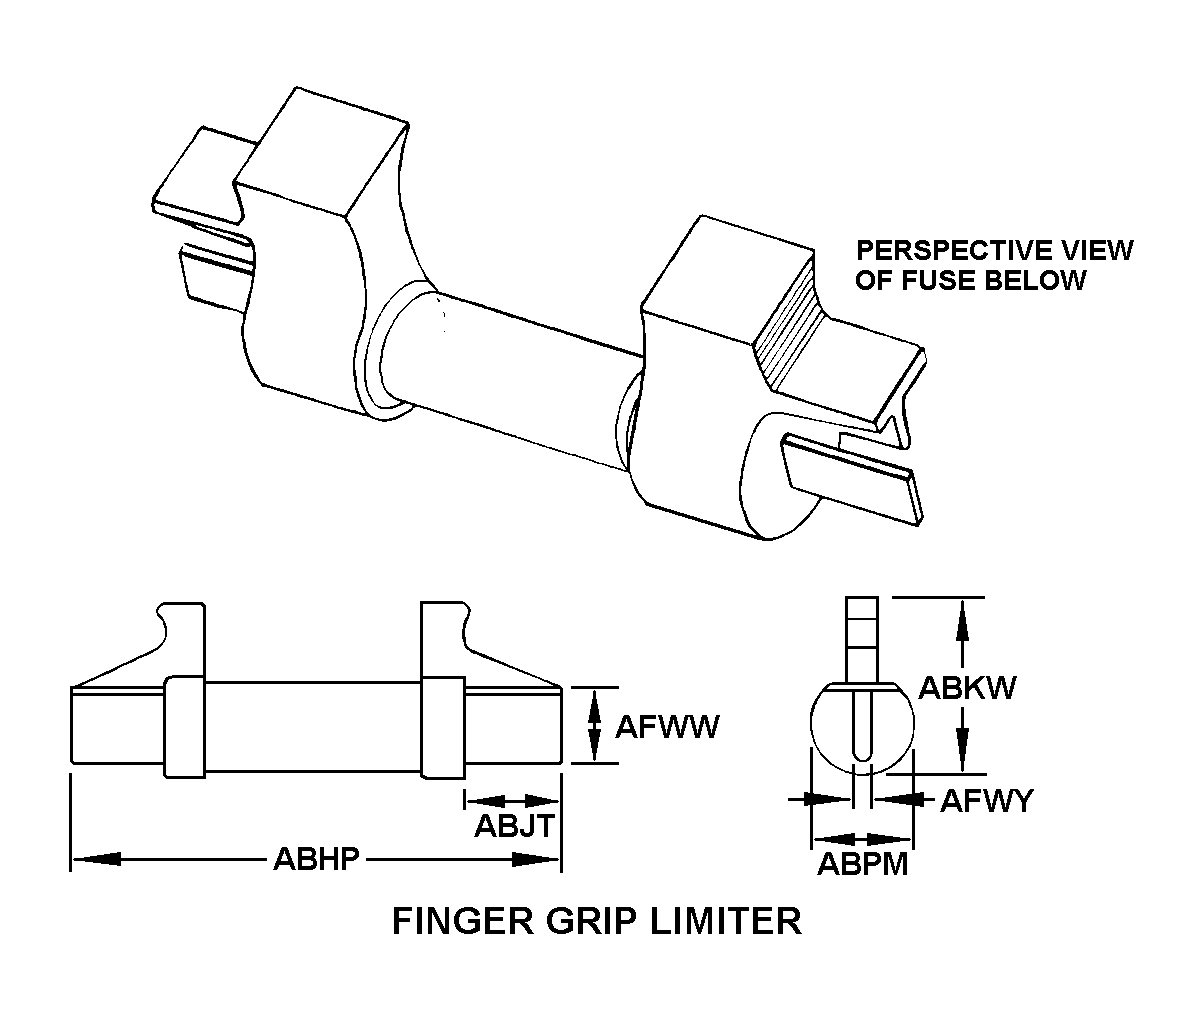 FINGER GRIP LIMITER style nsn 5920-01-533-2308